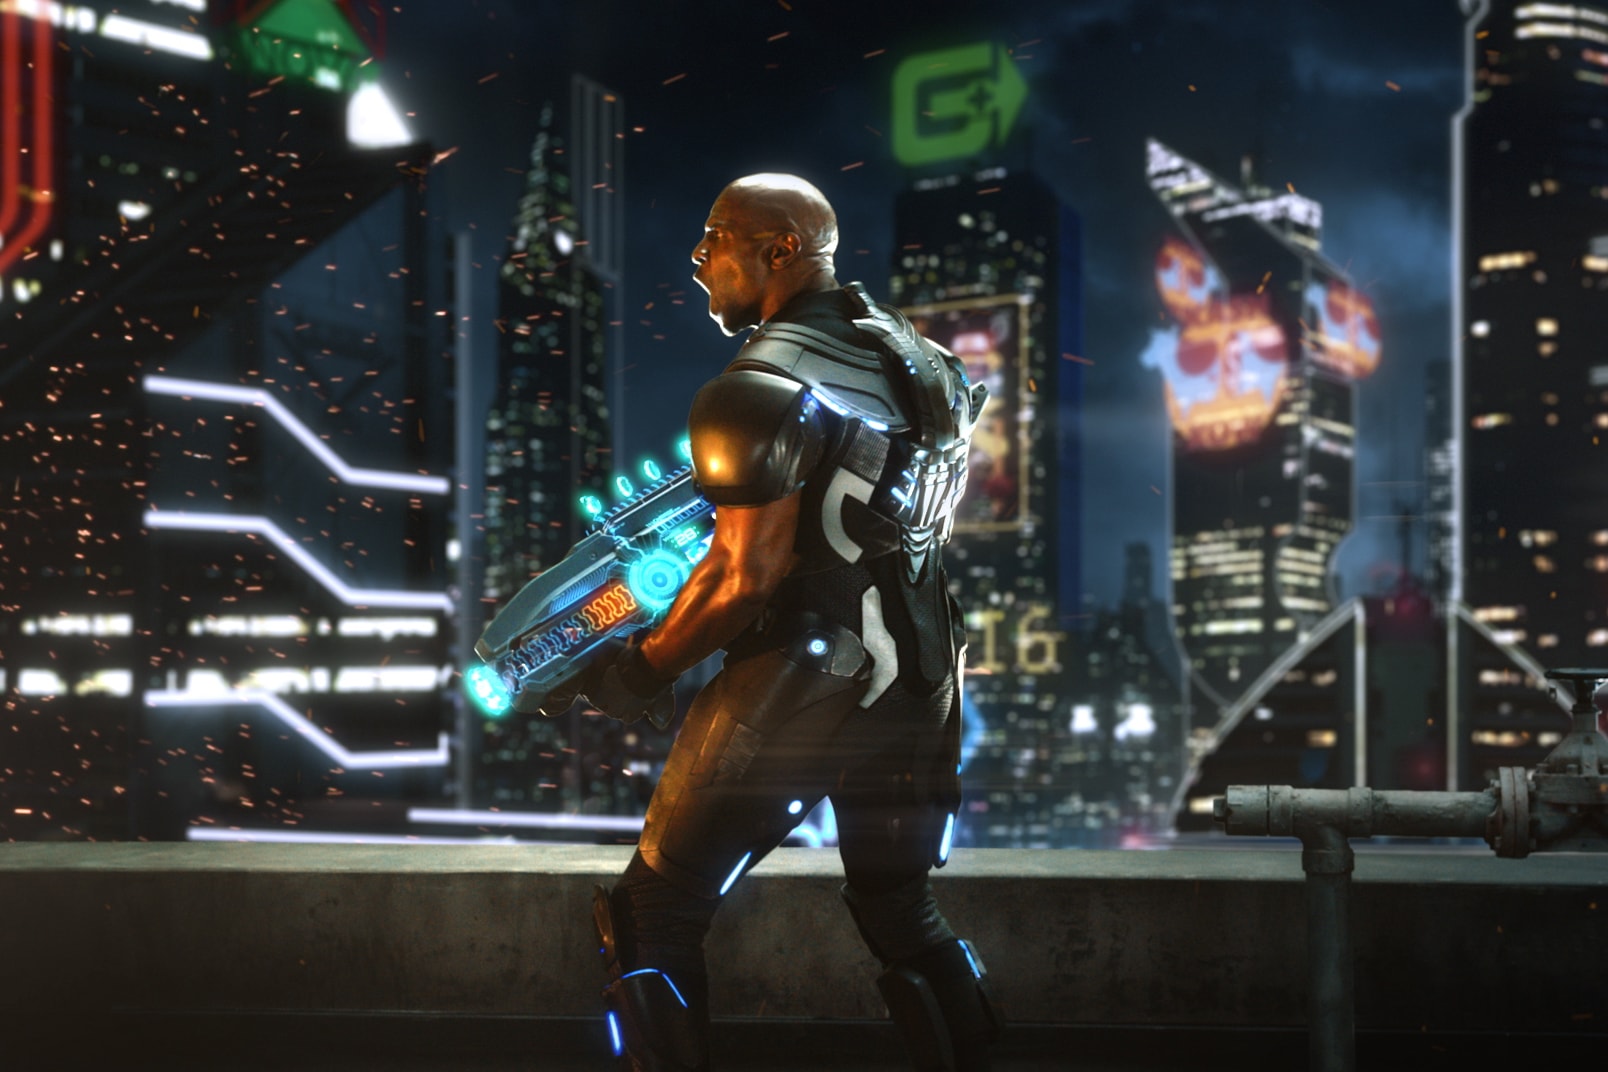 Crackdown 3 Microsoft Xbox One Release Date Delays Information Availability 2019 E3 Conference Events First Party Games